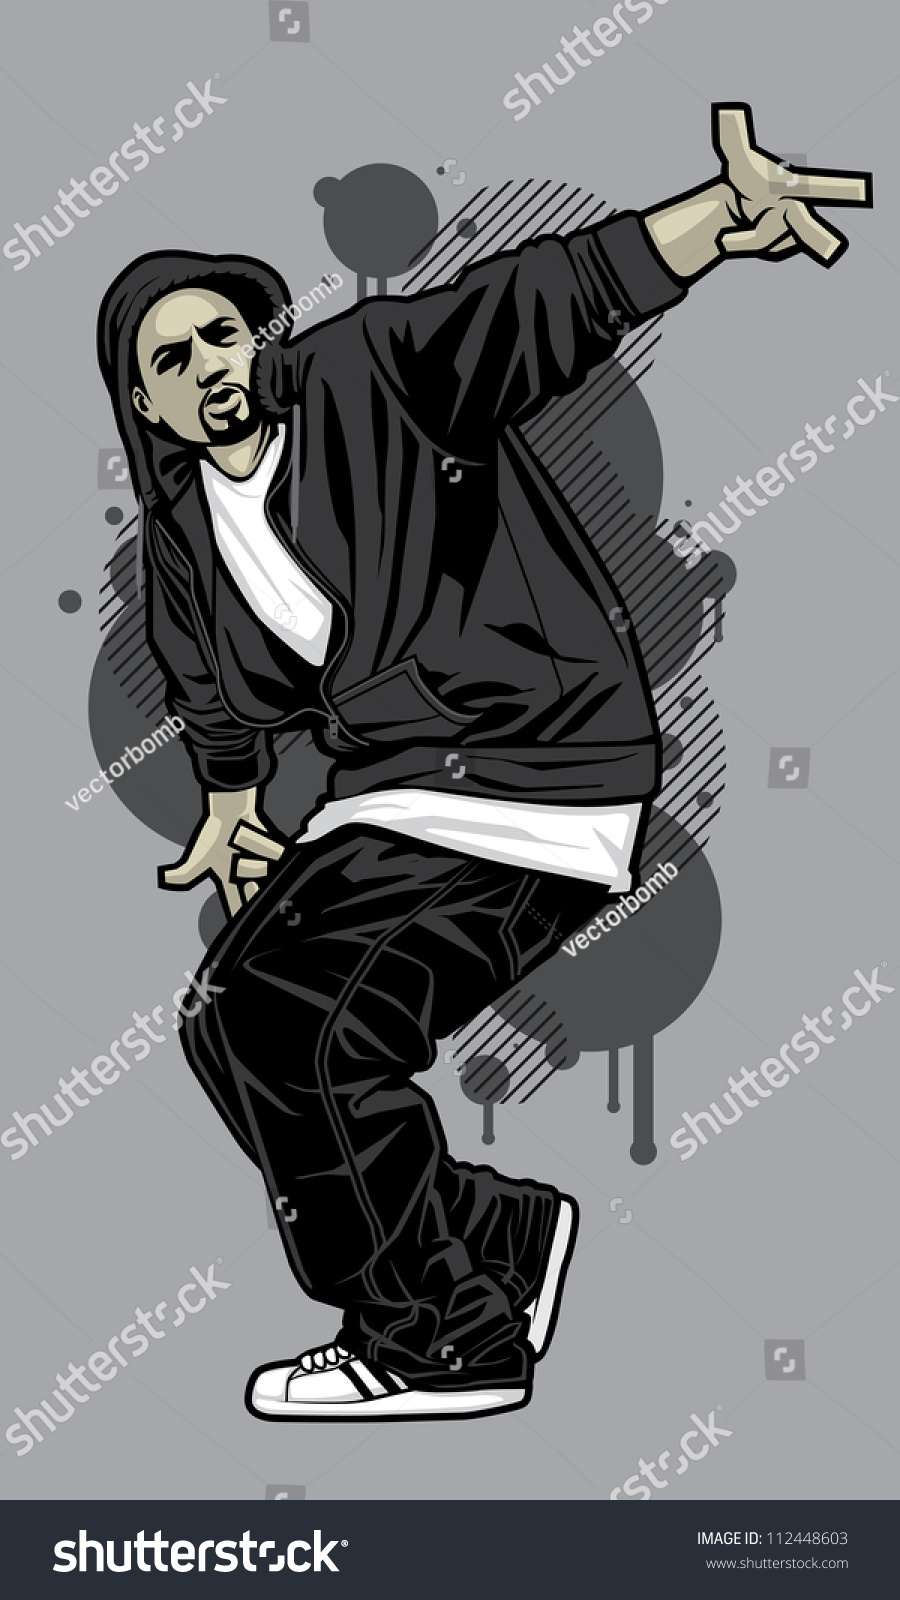 Urban Male Hoodie Model Vector Illustration Of A Young Urban Male Model ...